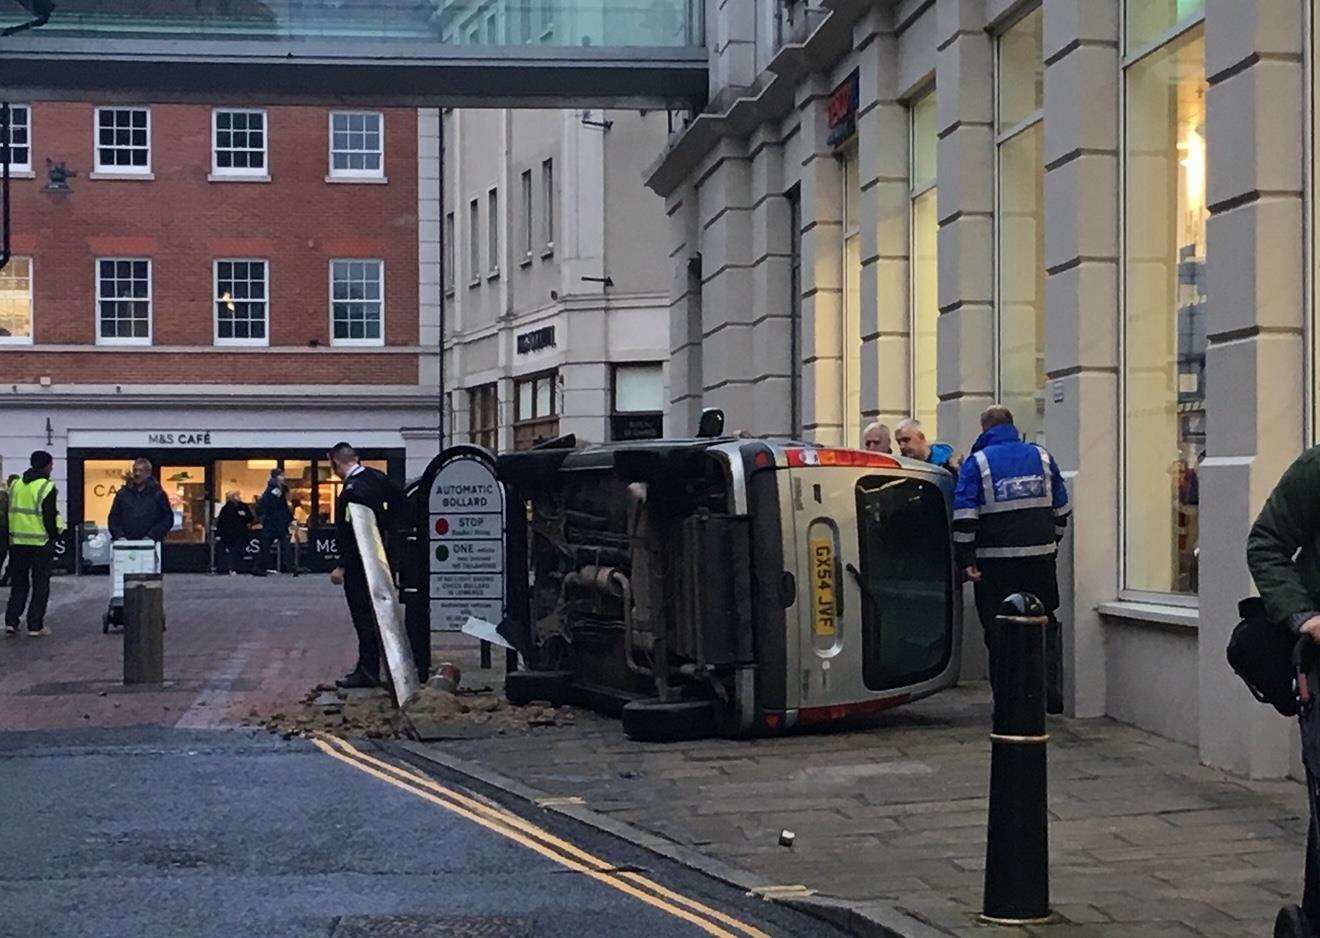 The vehicle has overturned at the border of the Whitefriars shopping complex. Picture: Nigel Fletcher